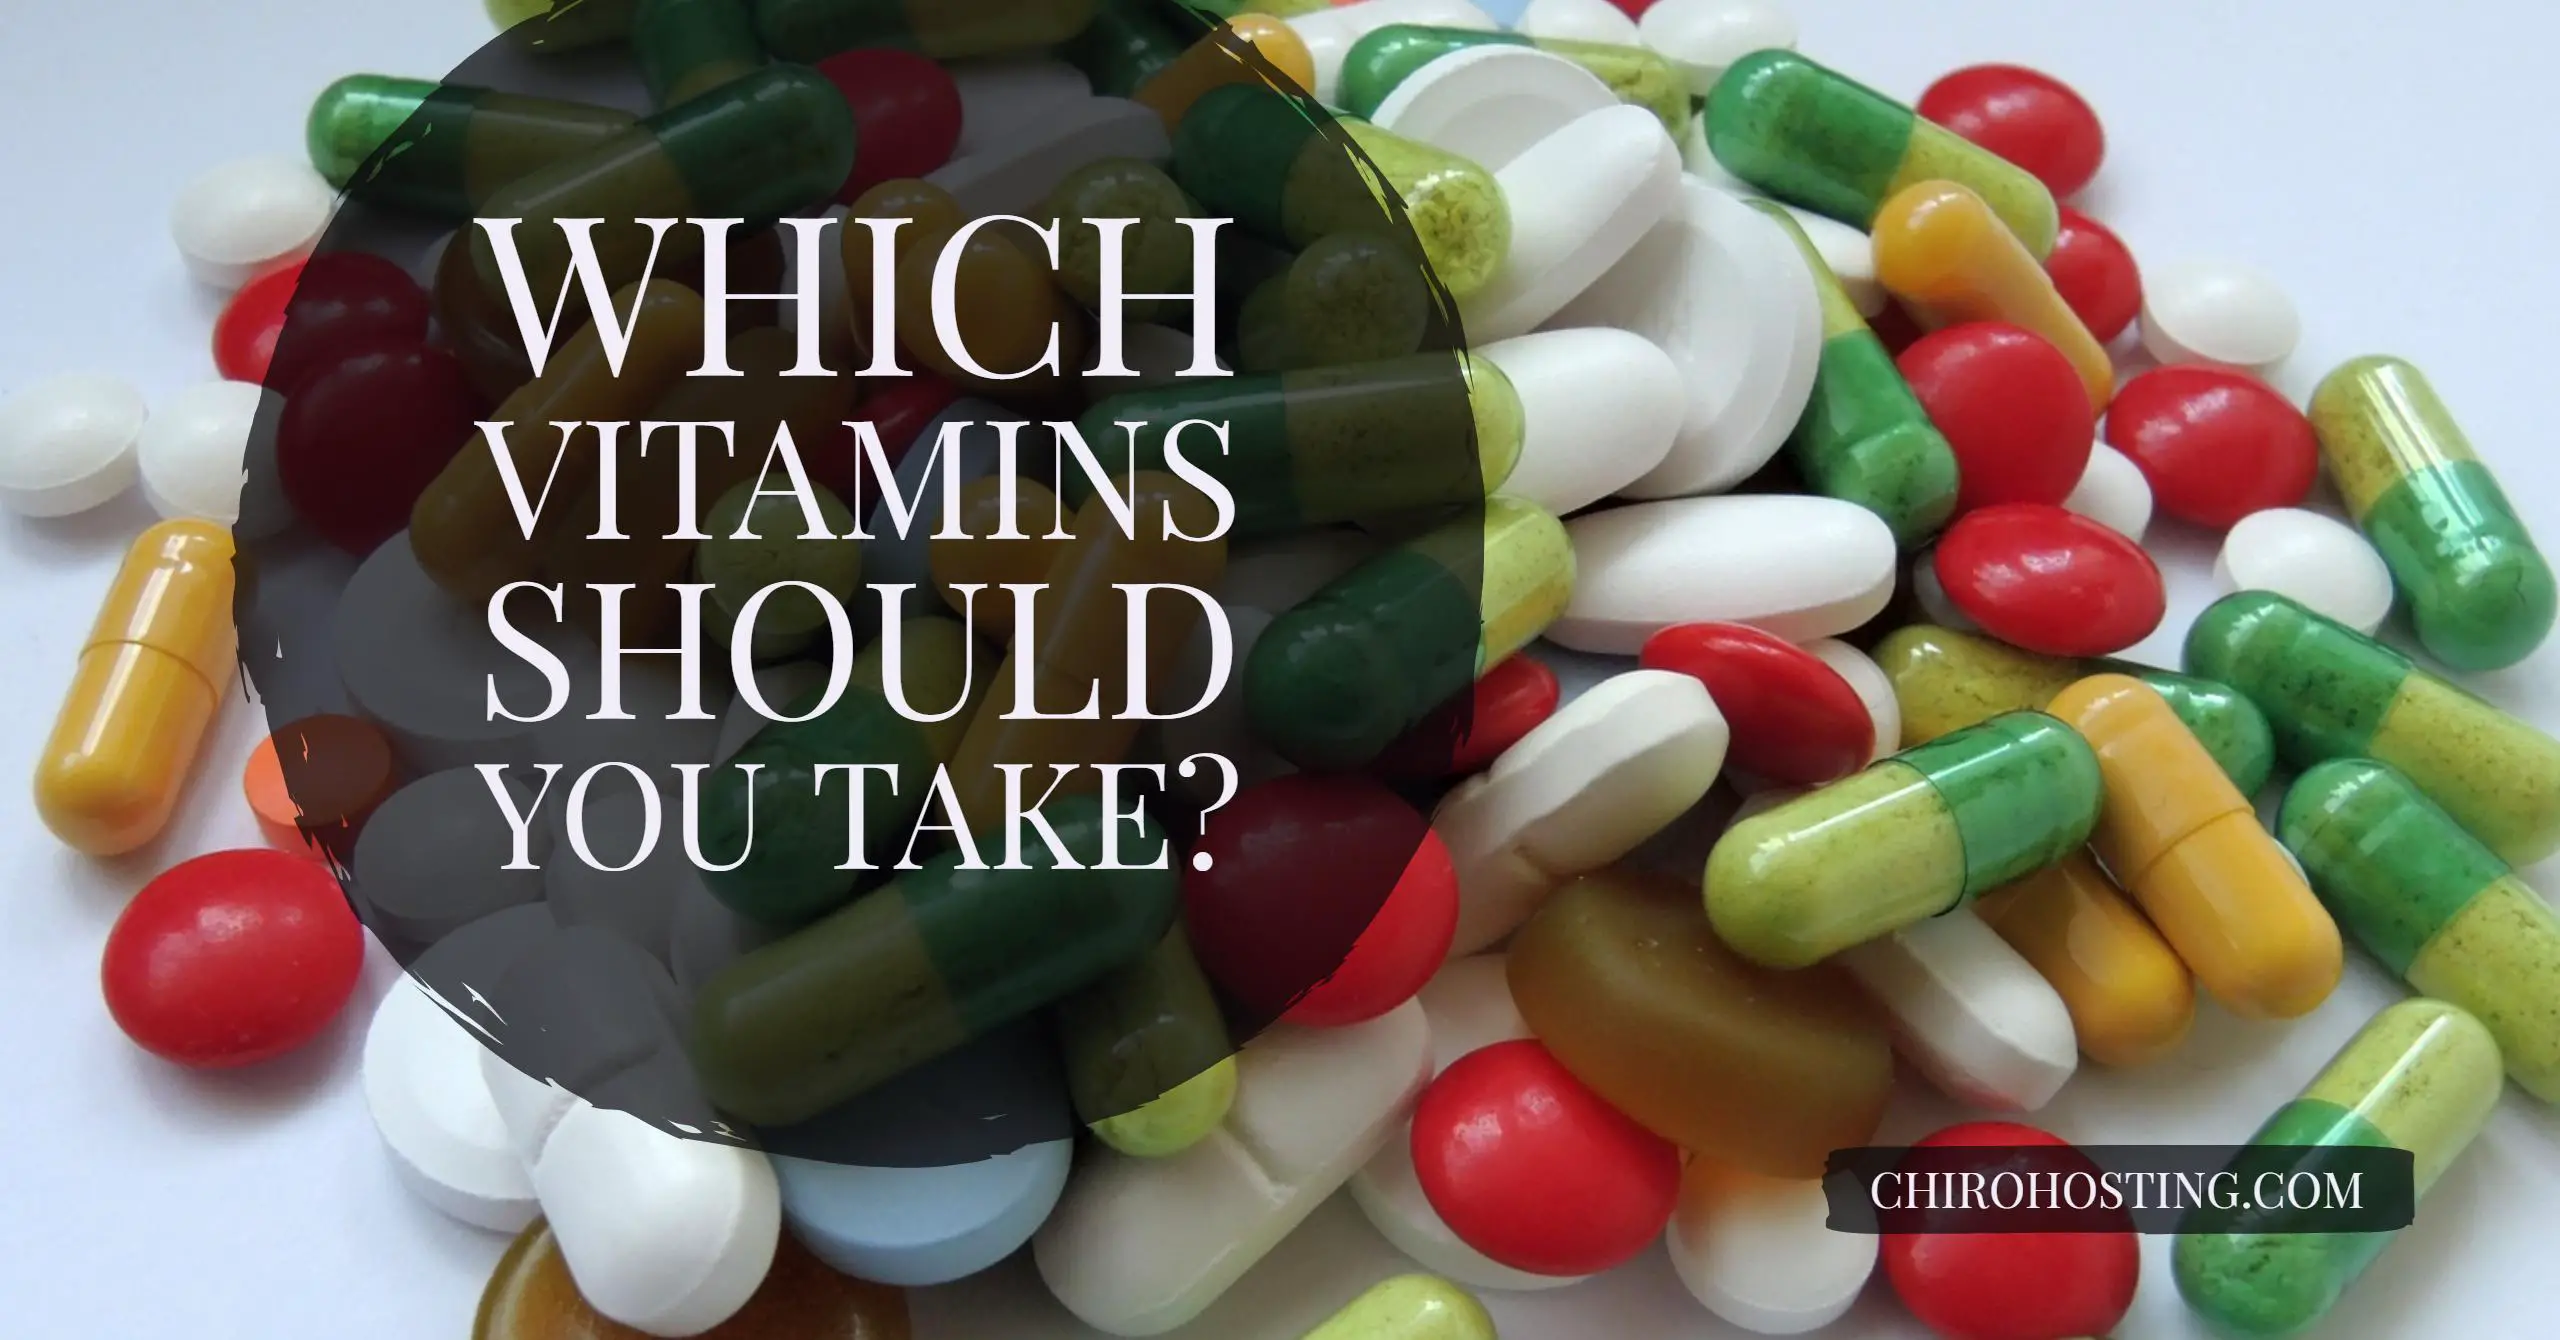 Which vitamins should you take?